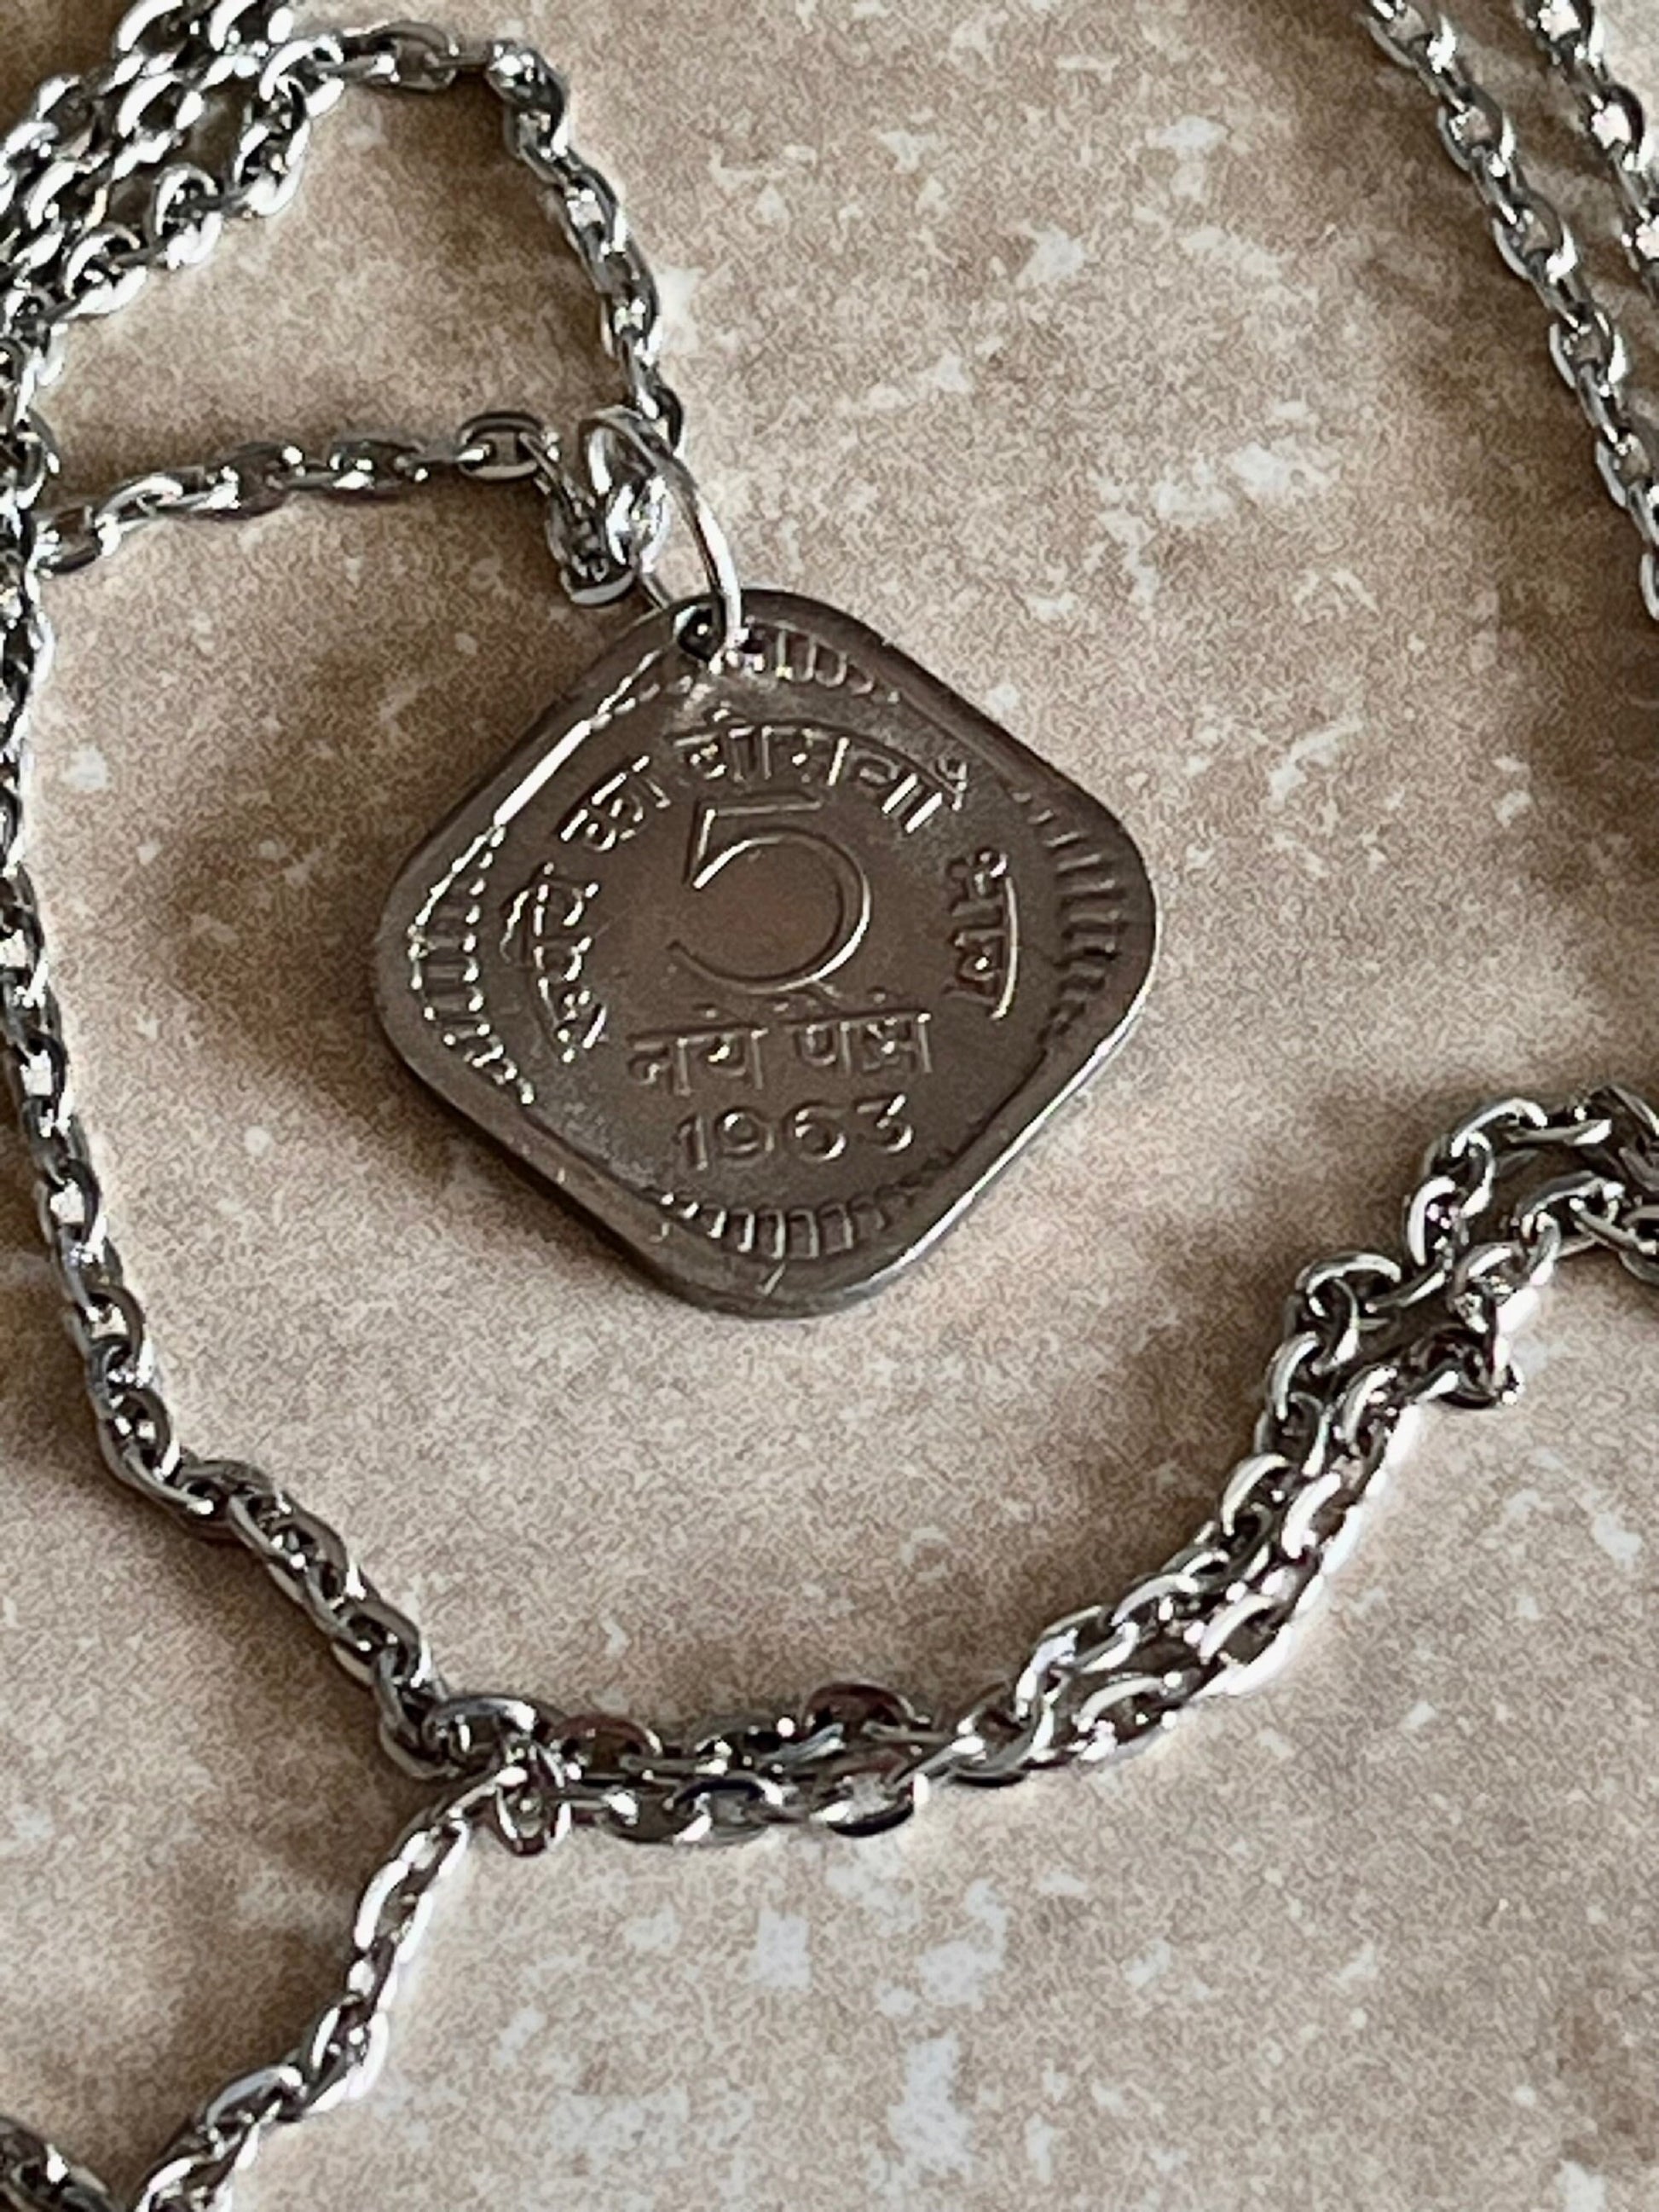 India Coin Necklace Indian East India 5 Annas Square Coin Personal Handmade Jewelry Gift Friend Charm For Him Her World Coin Collector